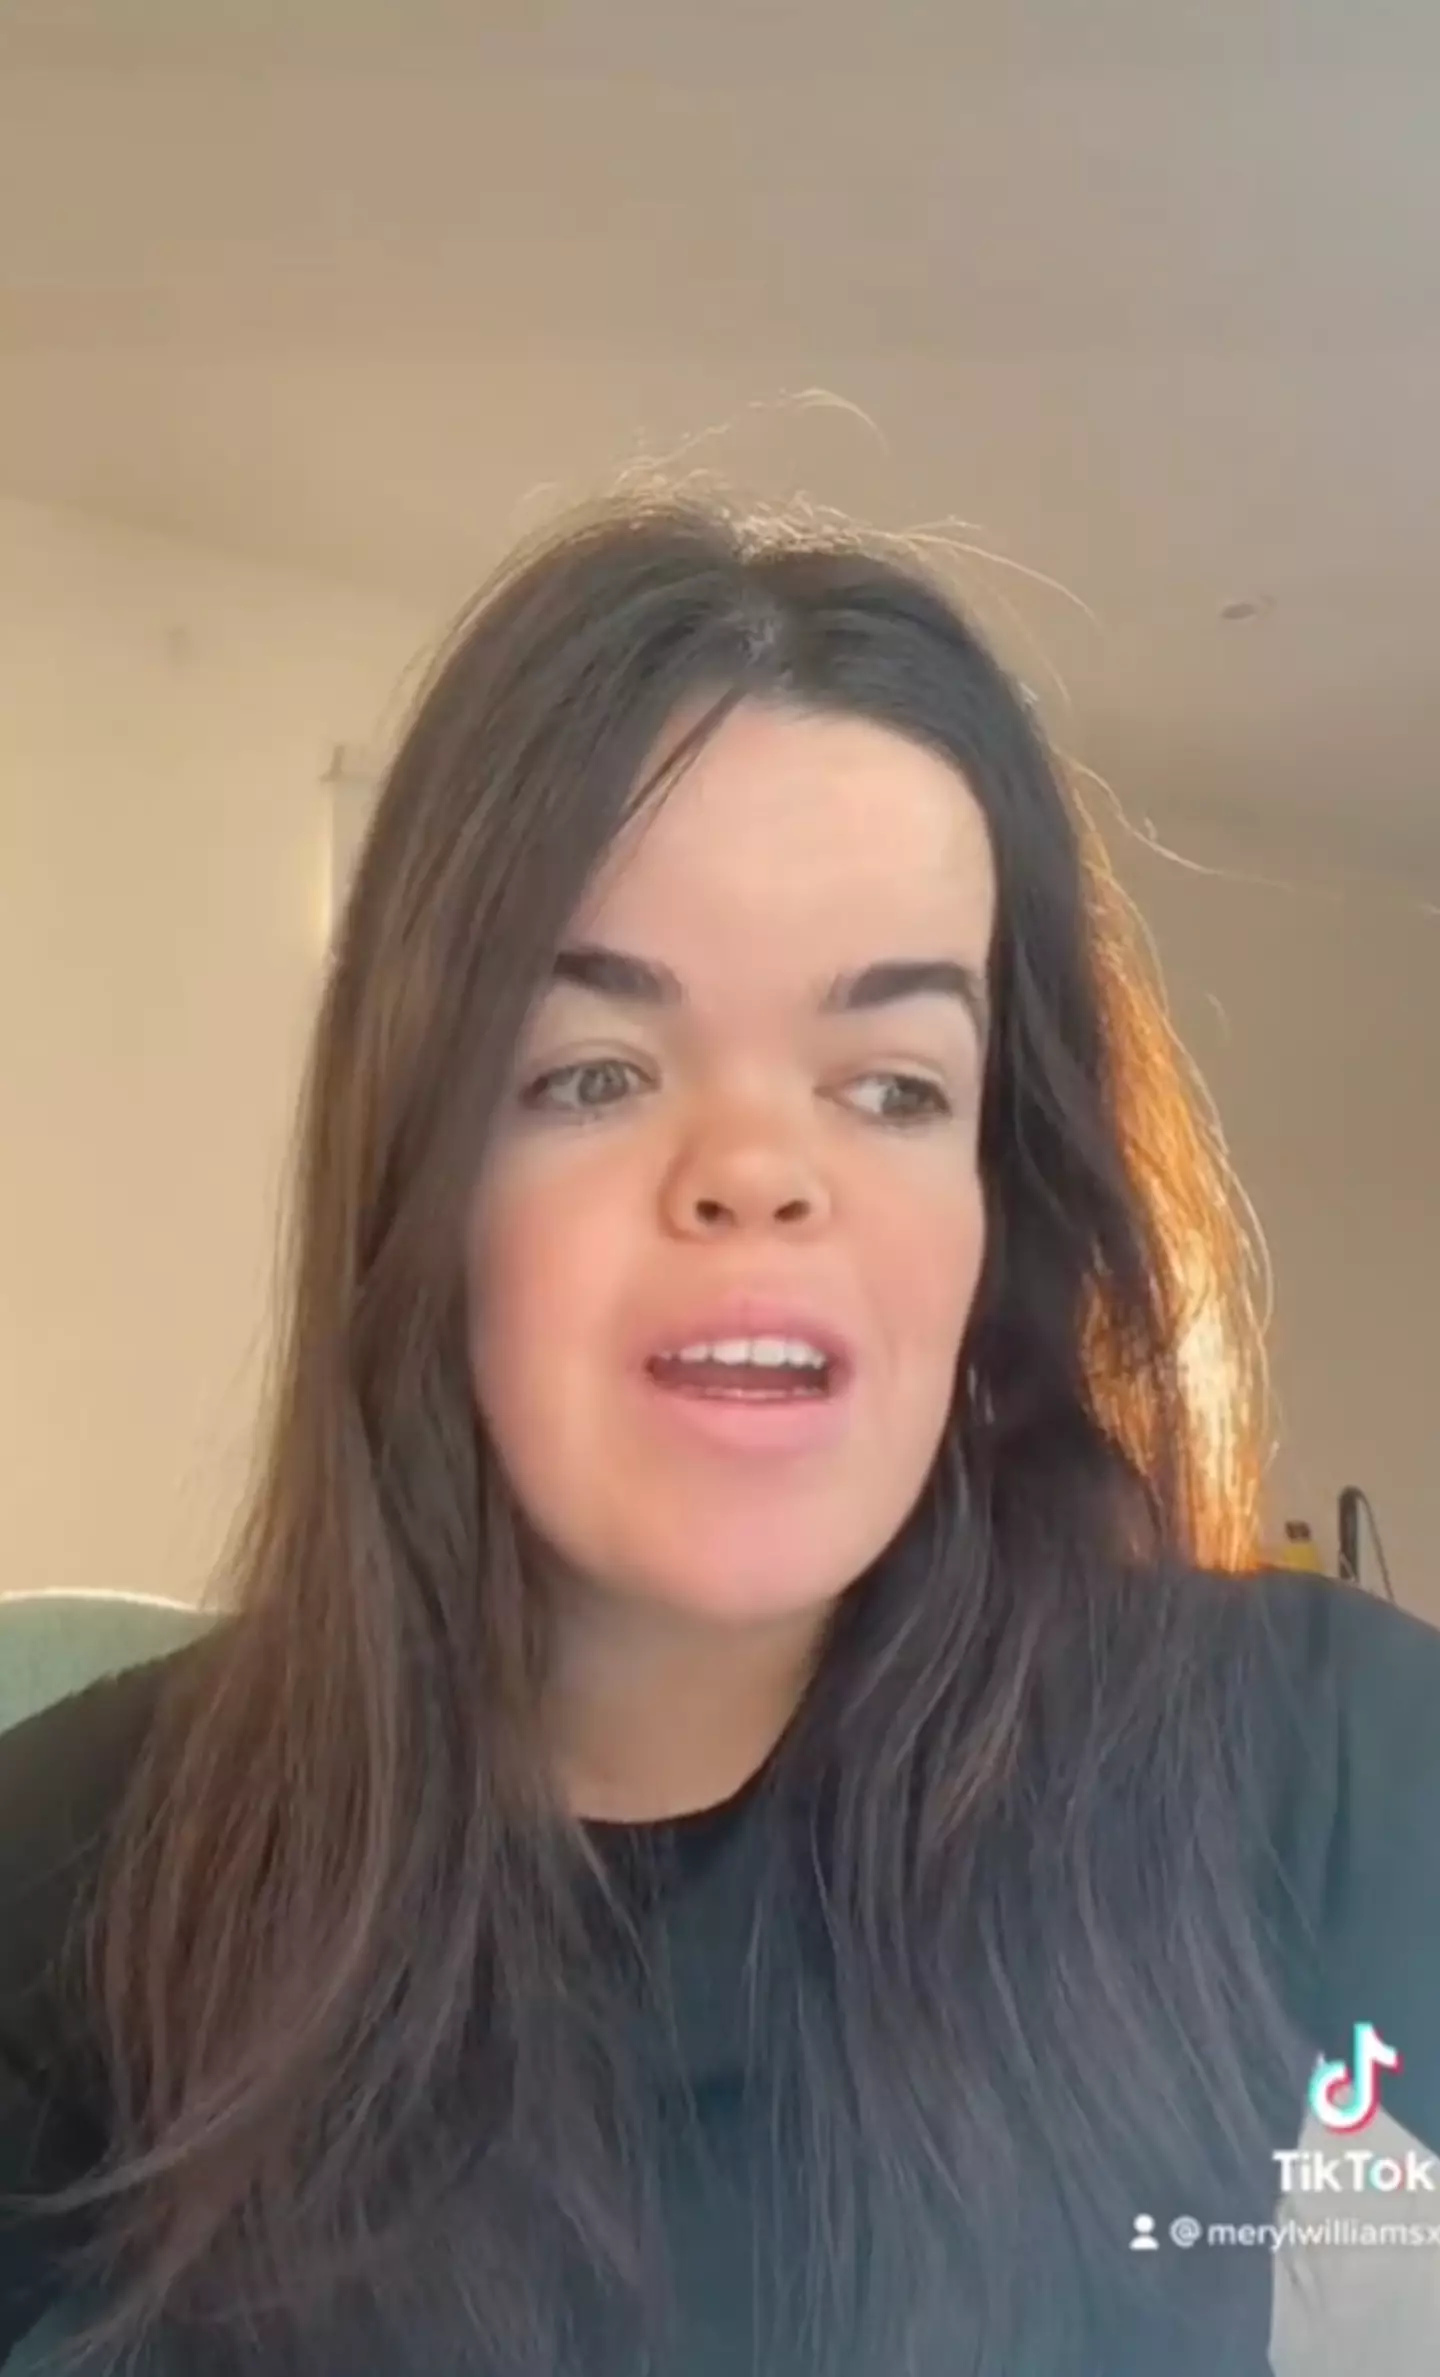 She took to TikTok to answer fans' burning questions about the show.